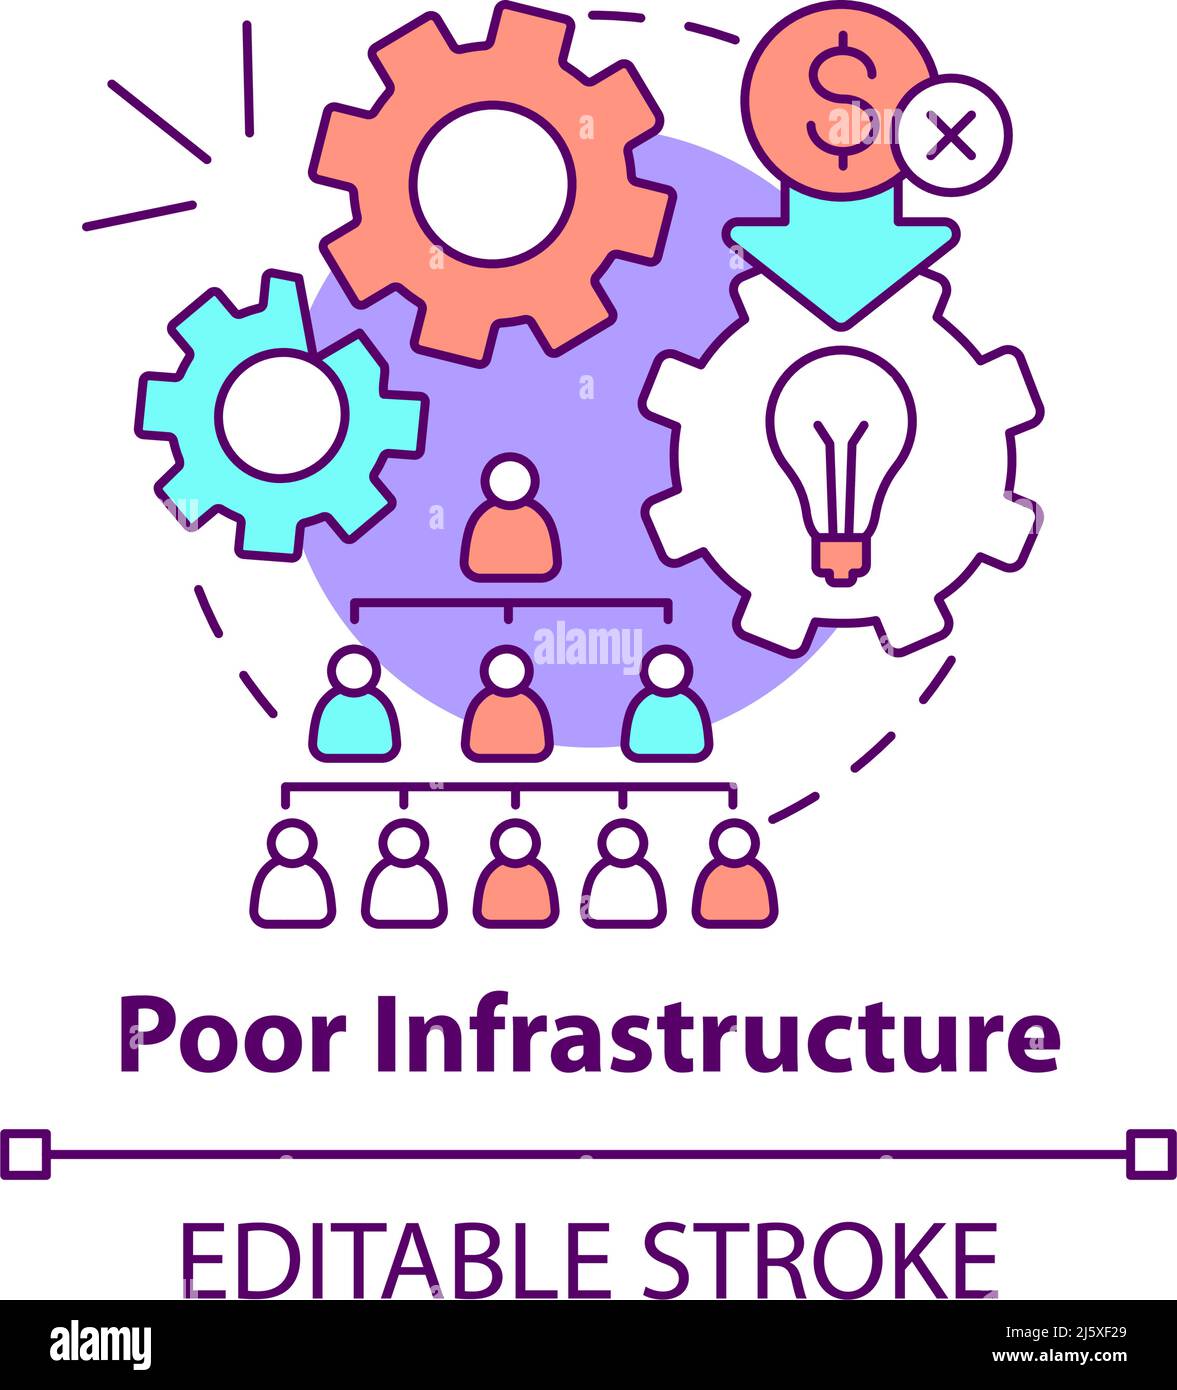 Poor infrastructure concept icon Stock Vector